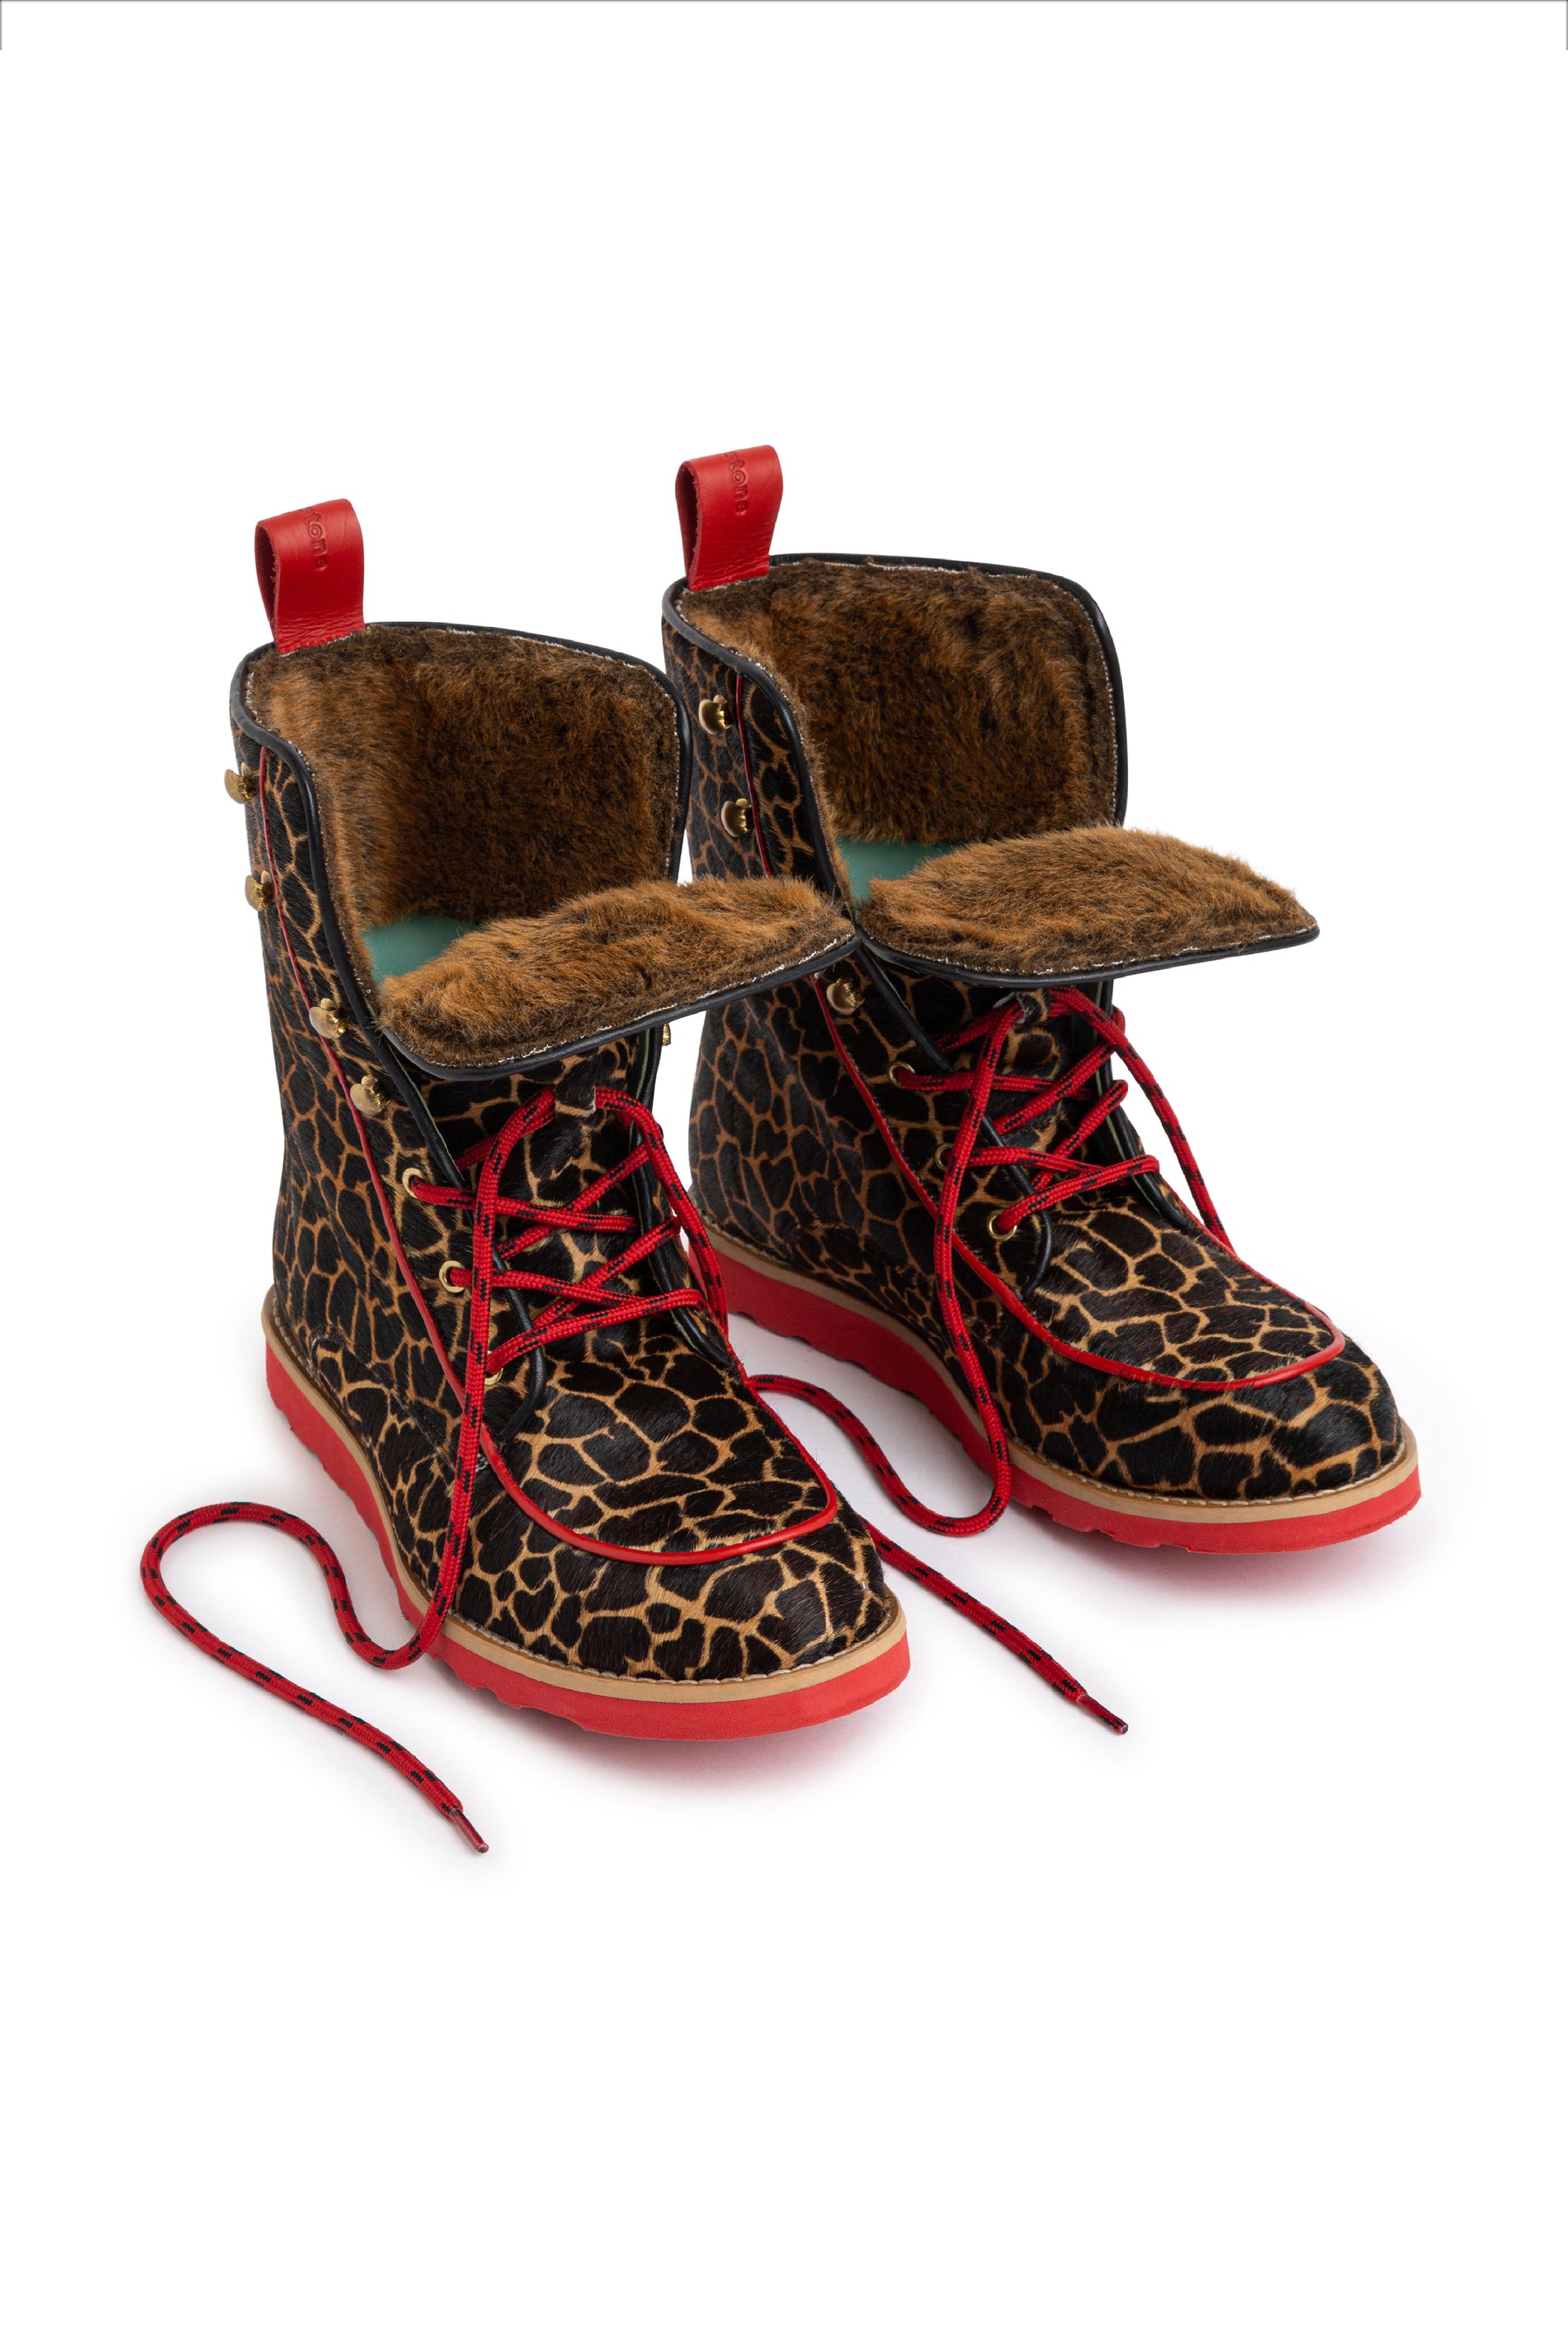 Mountain Boots in giraffe printed leather